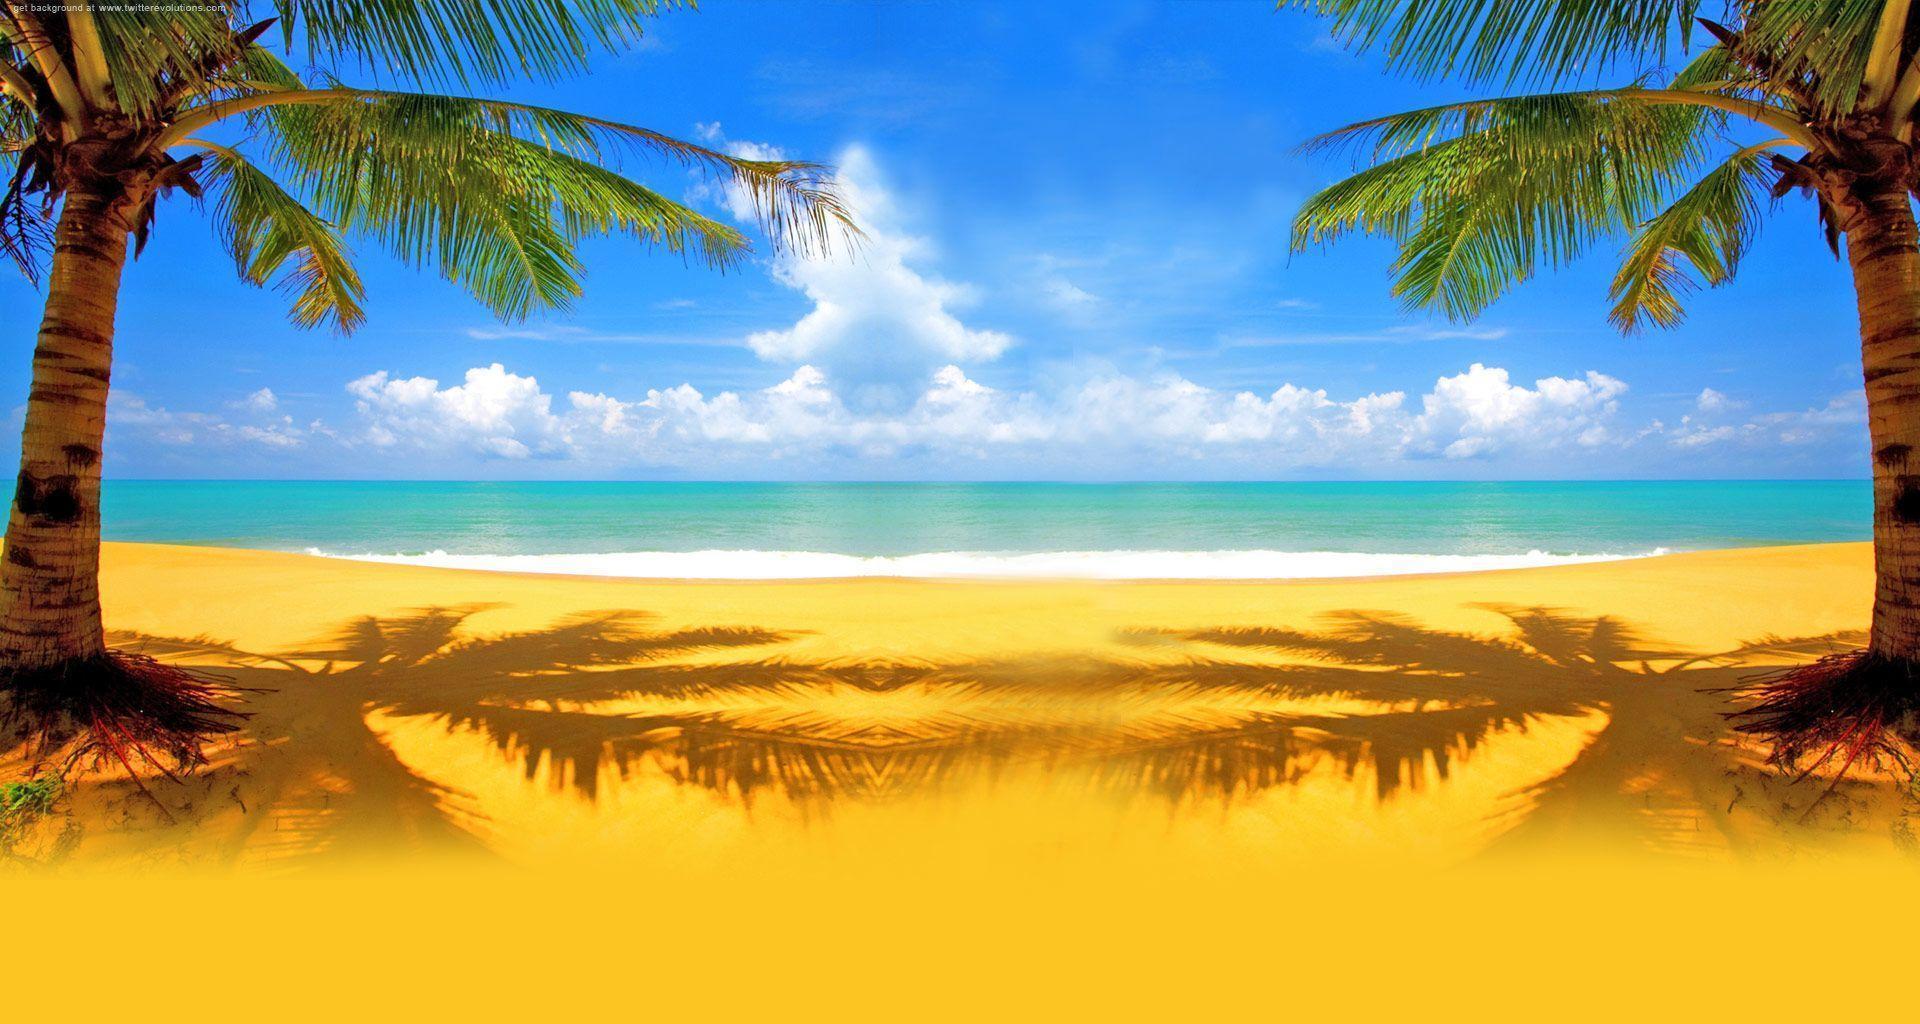 Twitter background with palm on a beach. Twitter background